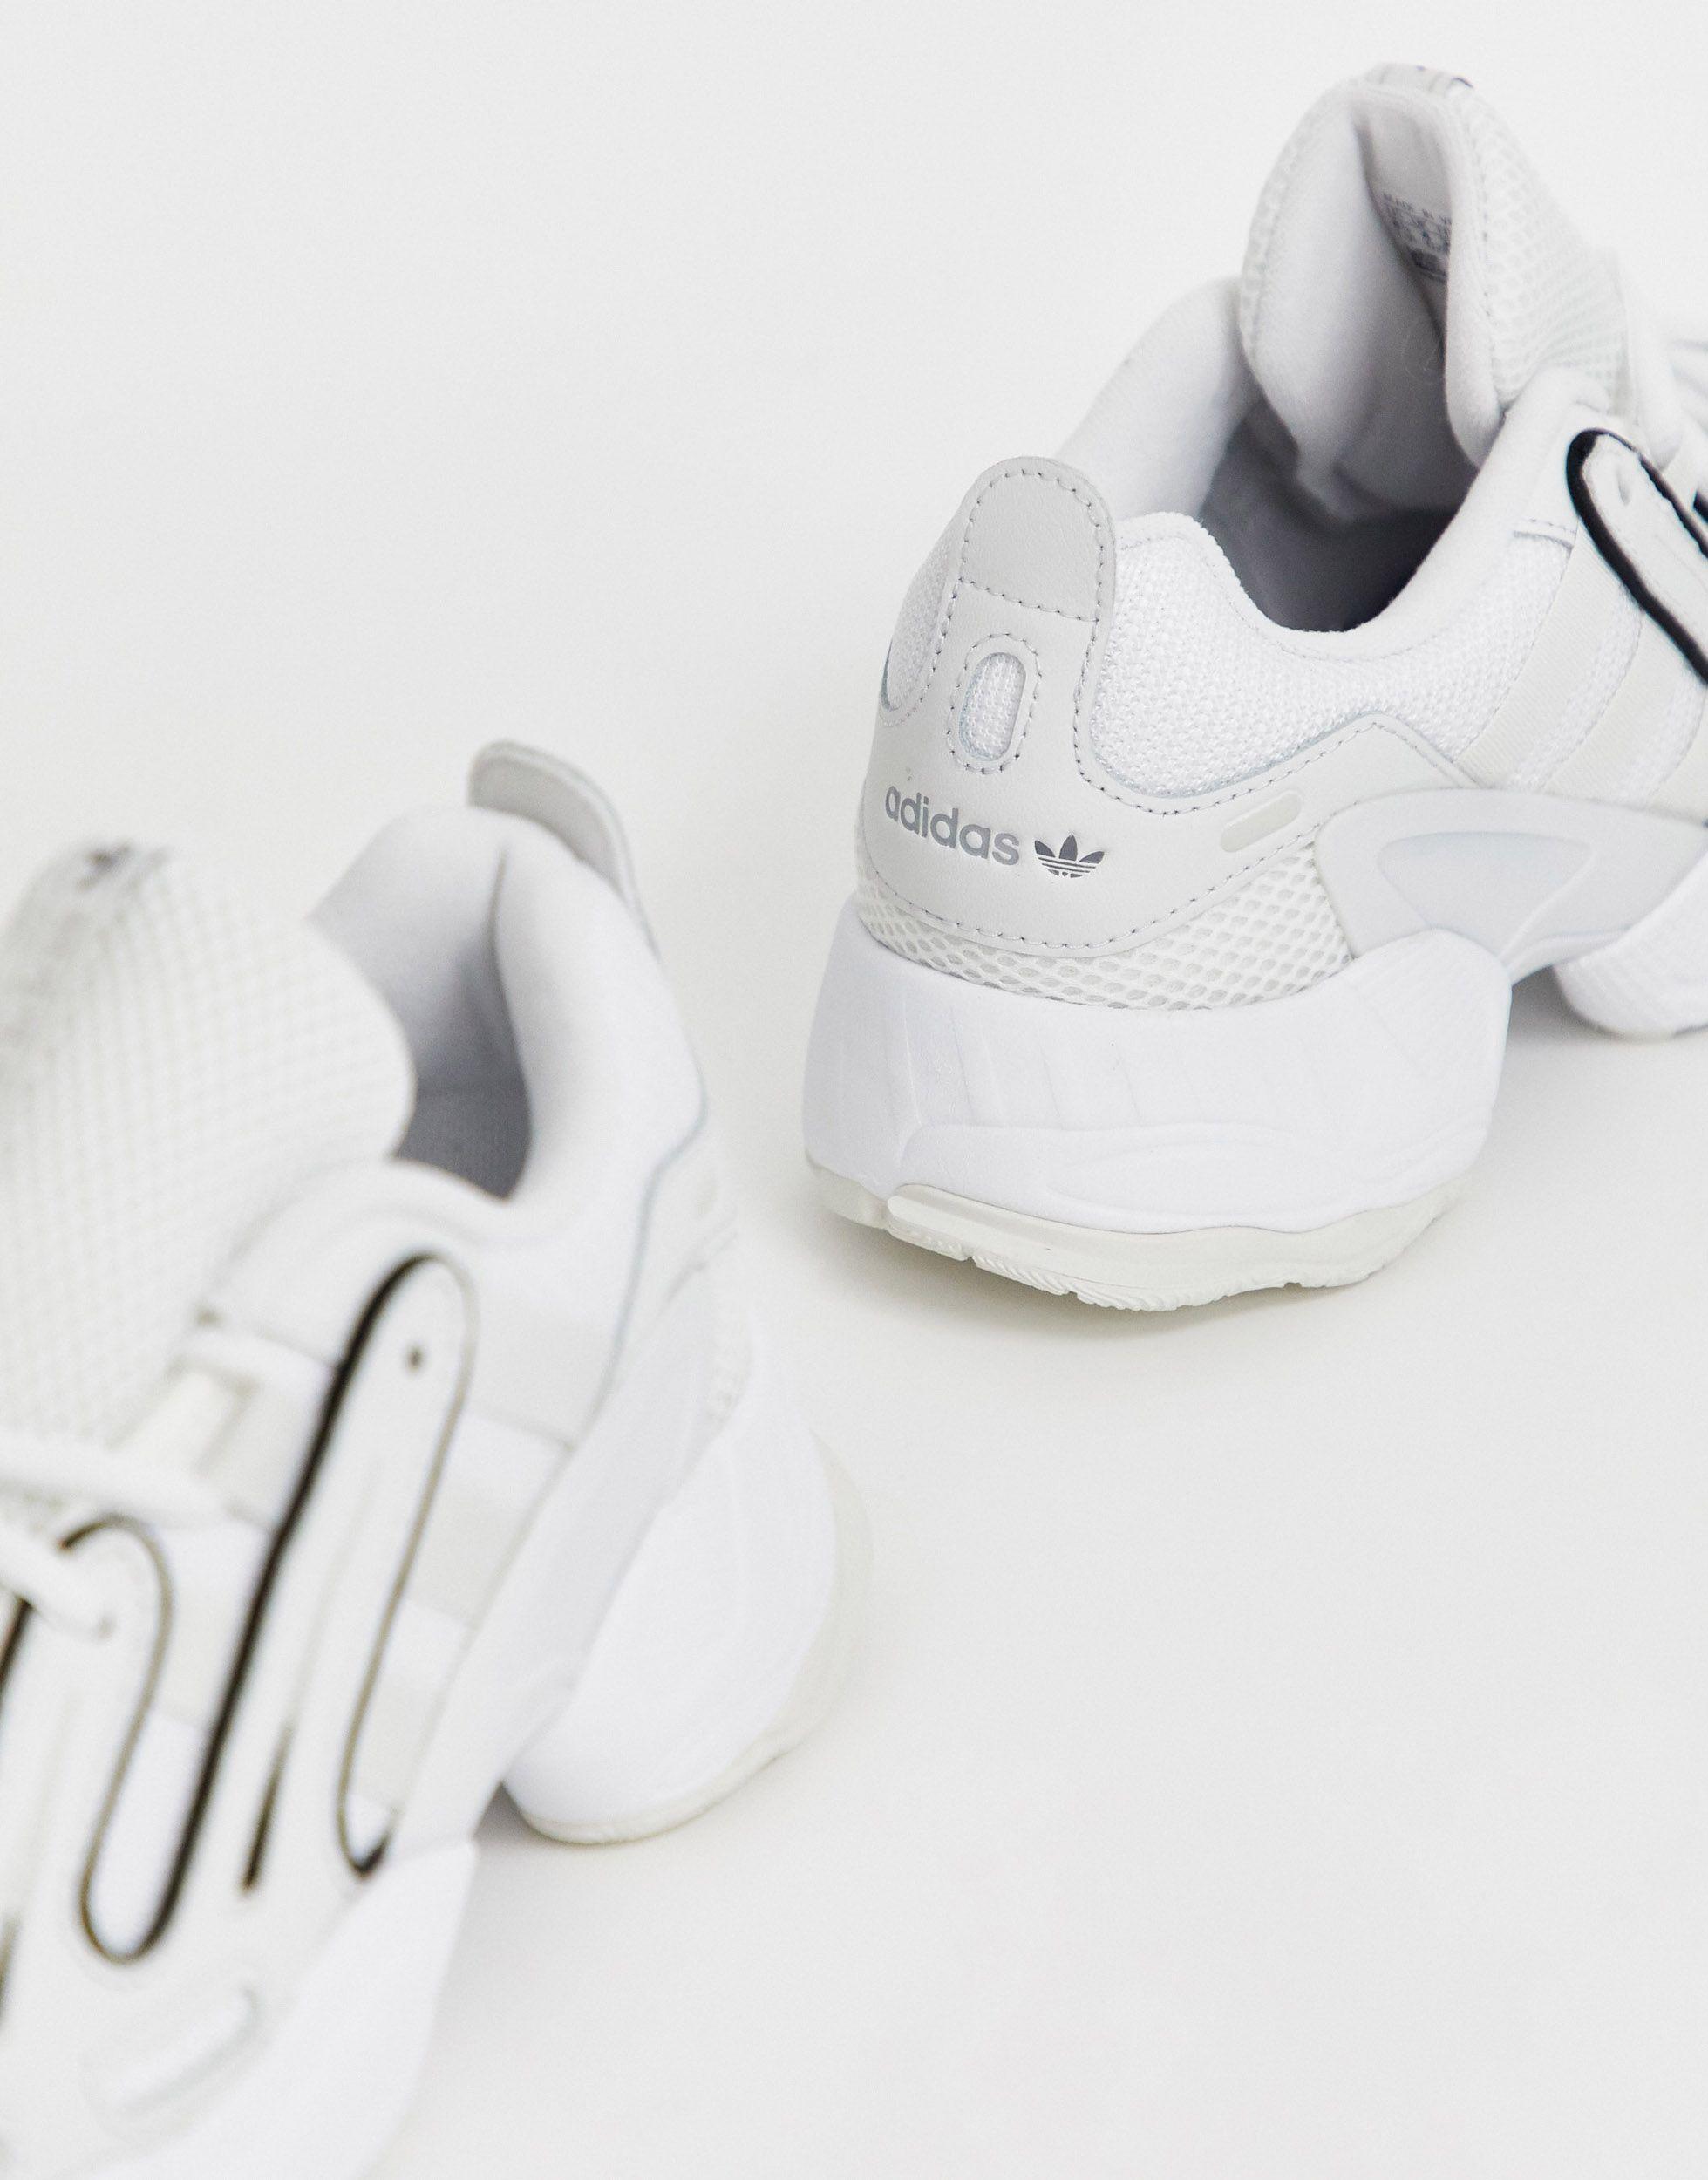 adidas Originals Rubber Eqt Gazelle Sneakers in White | Lyst